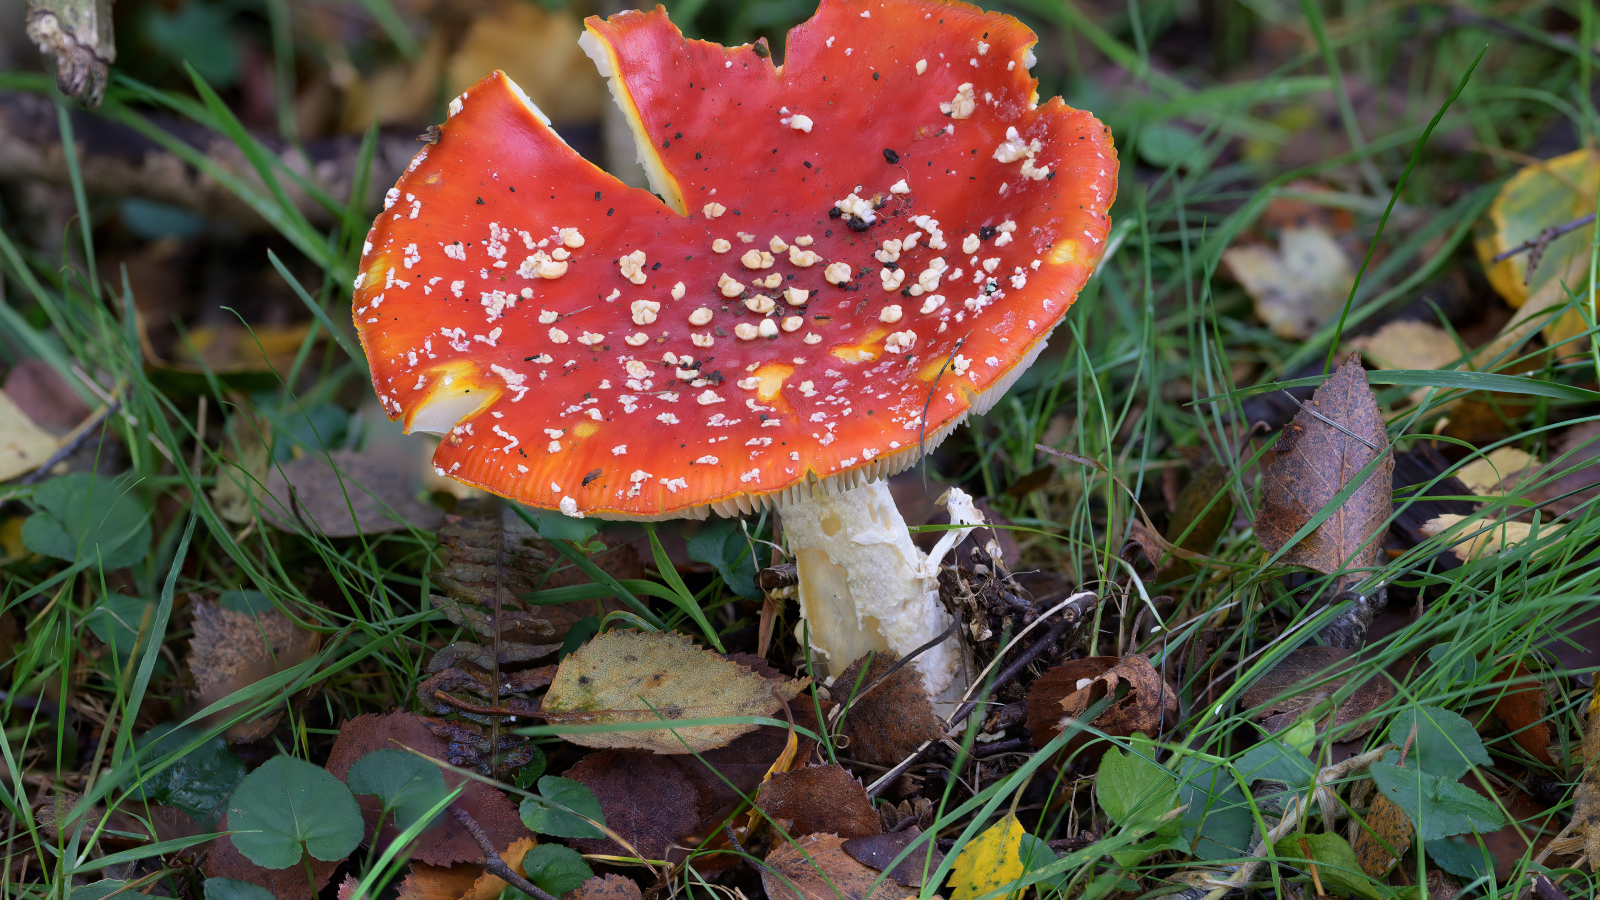 Red fly agaric on the ground with fallen leaves and grass